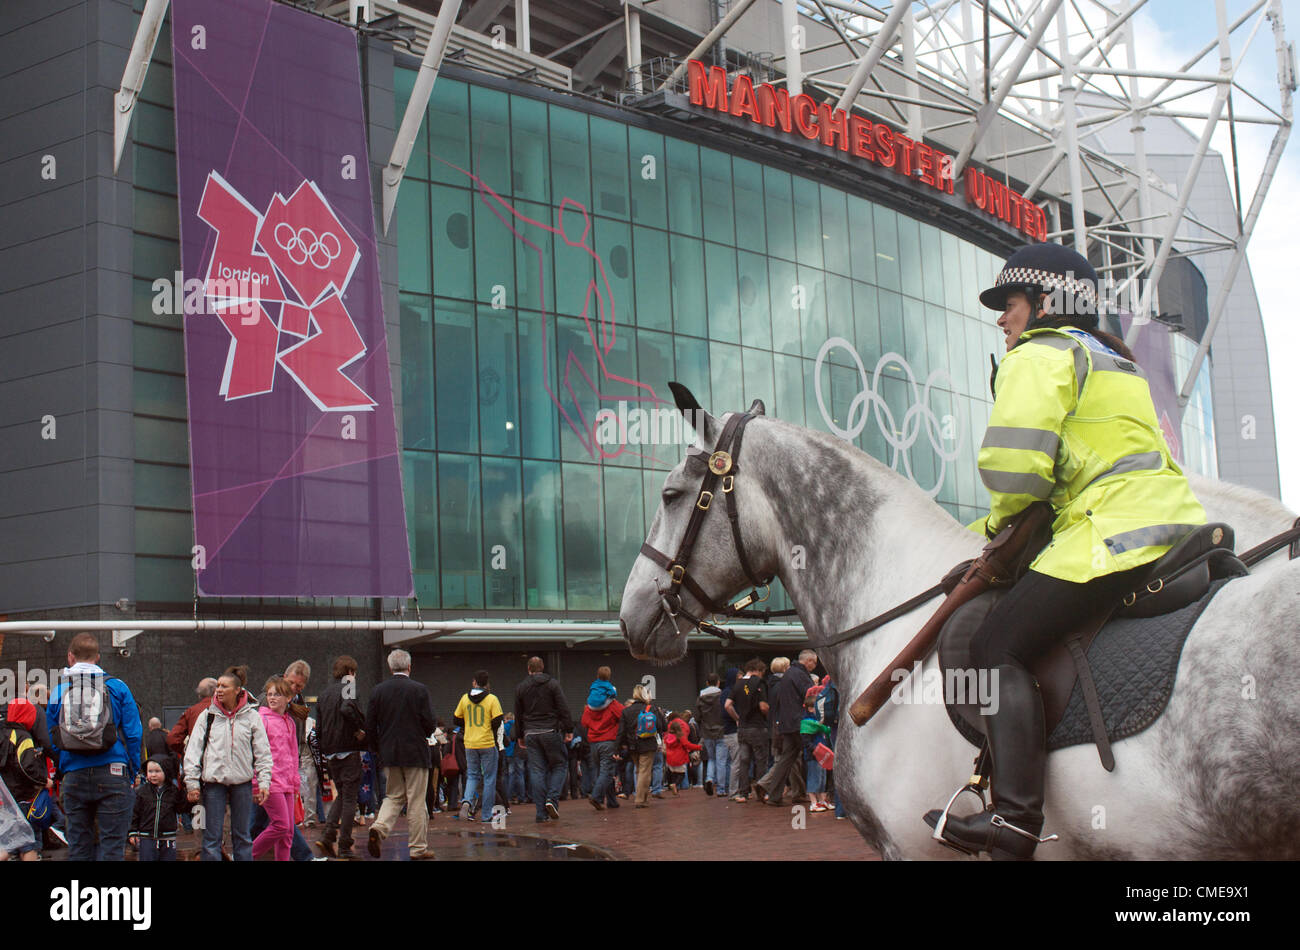 A police-officer on horseback is on duty outside Old Trafford, Manchester United's ground, where Olympic Football matches  will be played later in the afternoon.Brazil v Belarus will be followed by Egypt v New Zealand. Manchester, UK 29-07-2012 Stock Photo